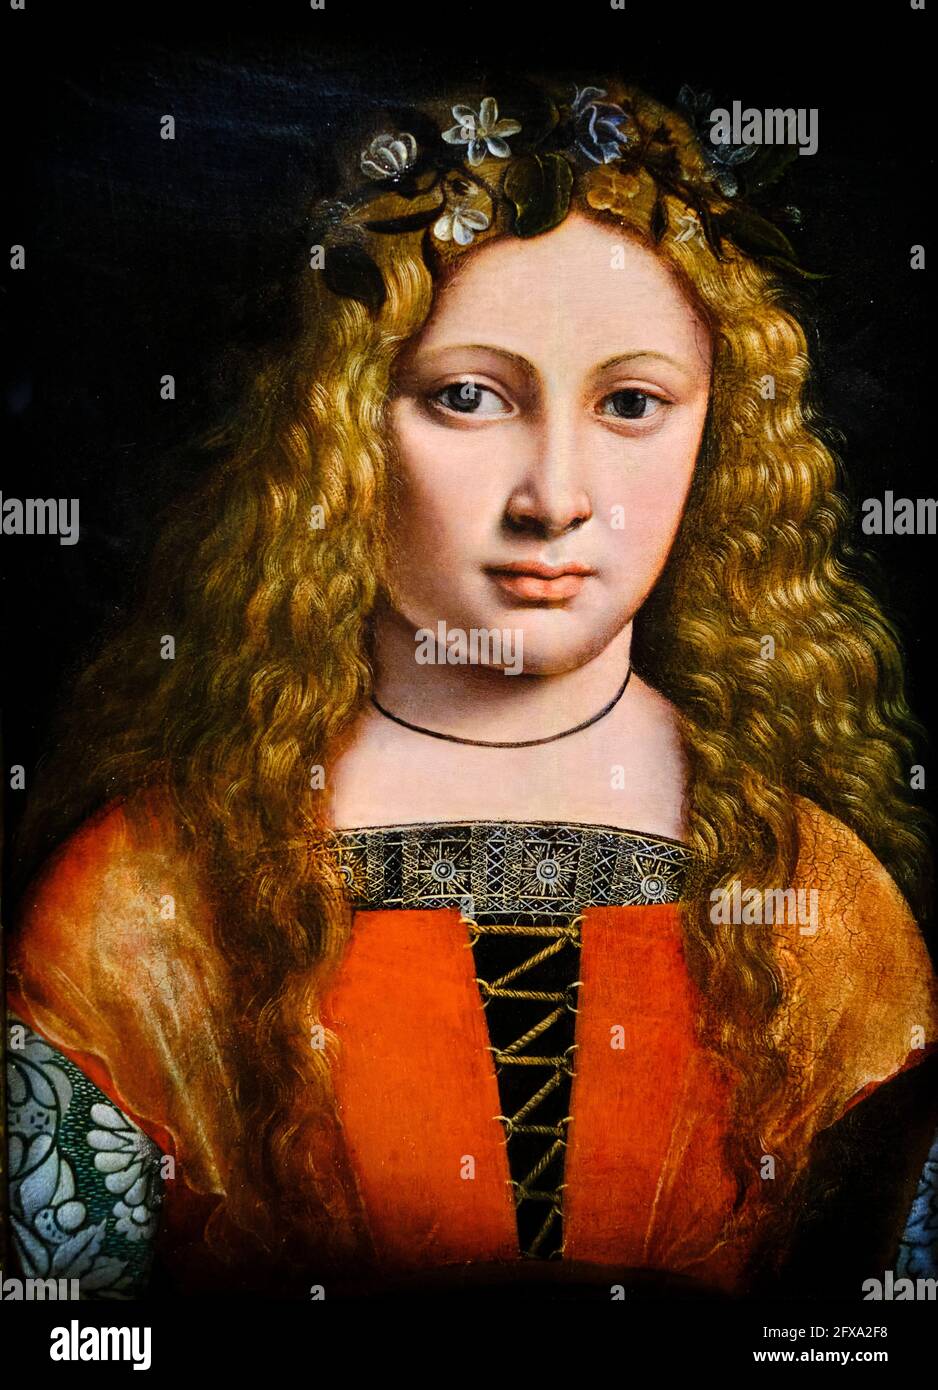 United States, Raleigh, North Carolina Museum of Art, Giovanni Antonio Boltraffio, Girl crowned with flowers Stock Photo